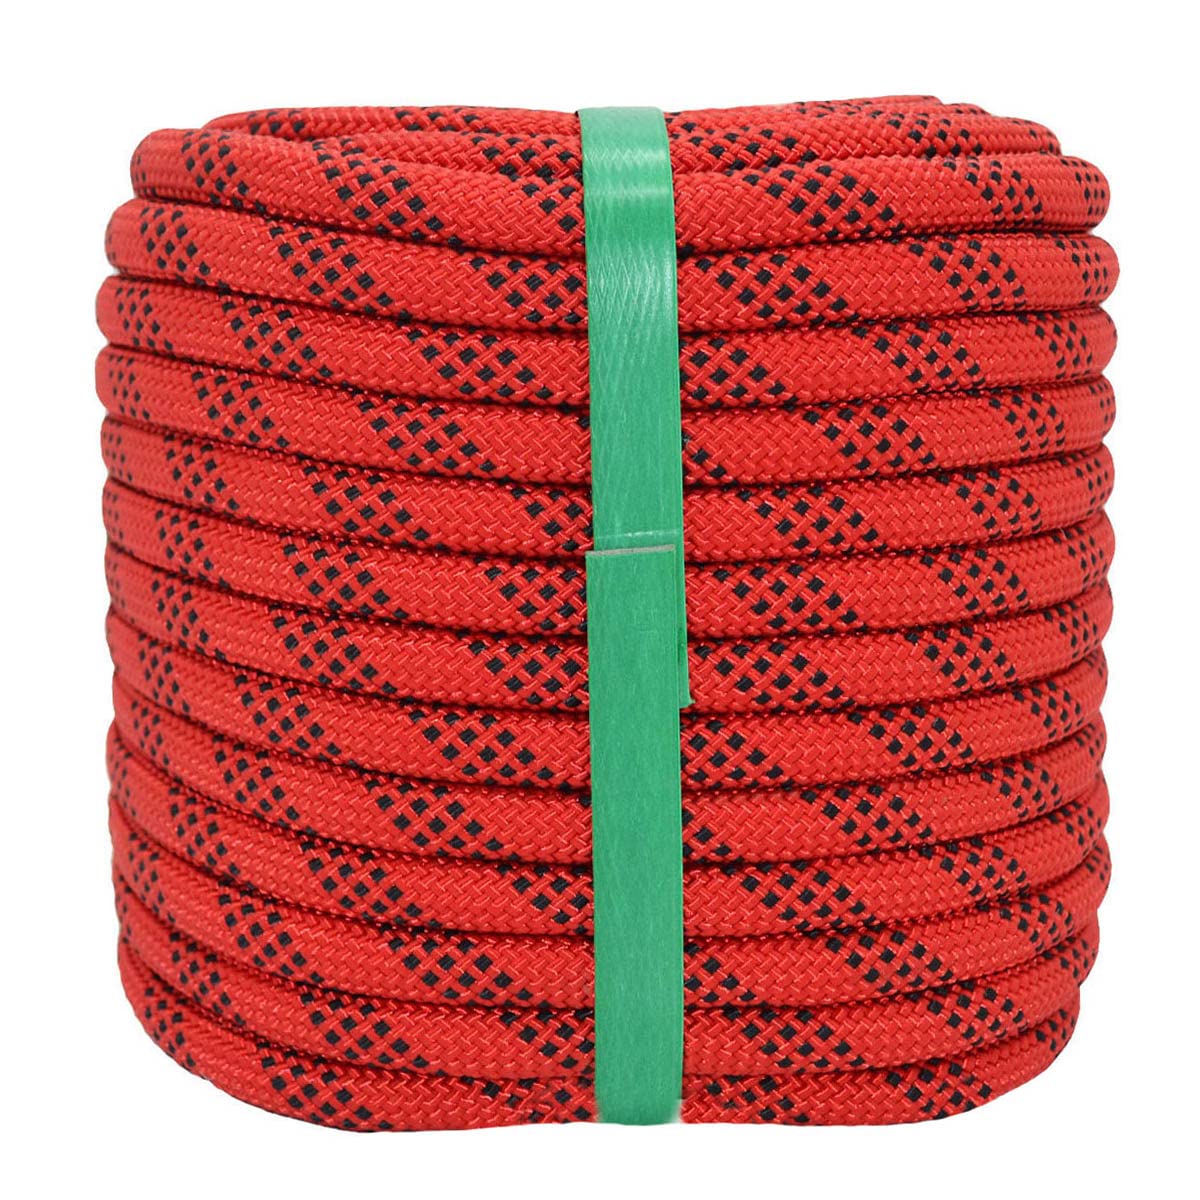 YUZENET Braided Polyester Arborist Rigging Rope (3/8inch X 100feet) High  Strength Outdoor Rope for Rock Climbing Hiking Camping Swing, Red/Black